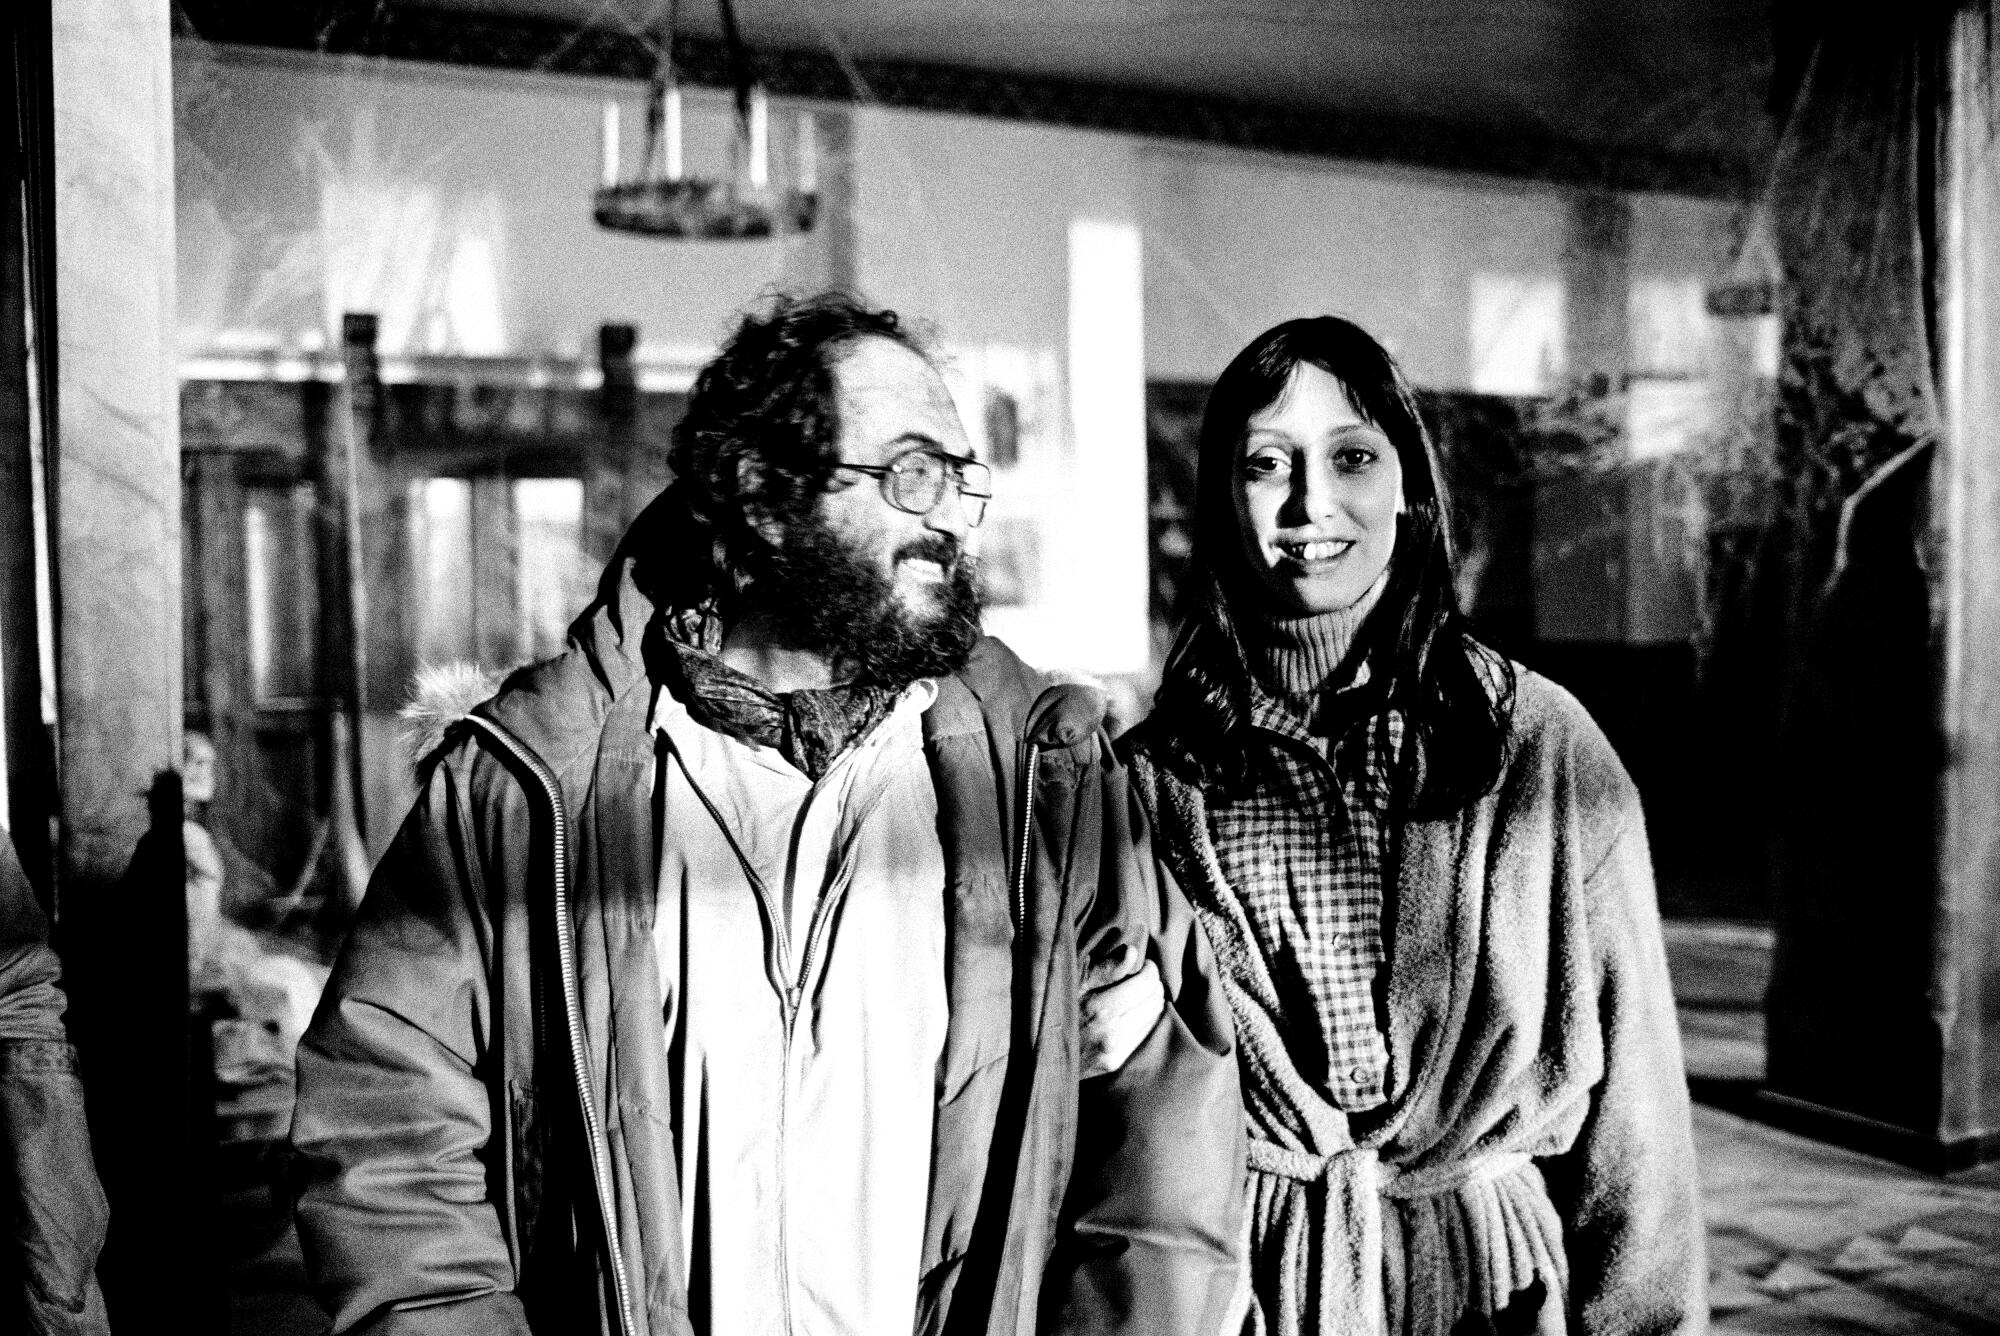 Stanley Kubrick and Shelley Duvall on the hotel lobby set.